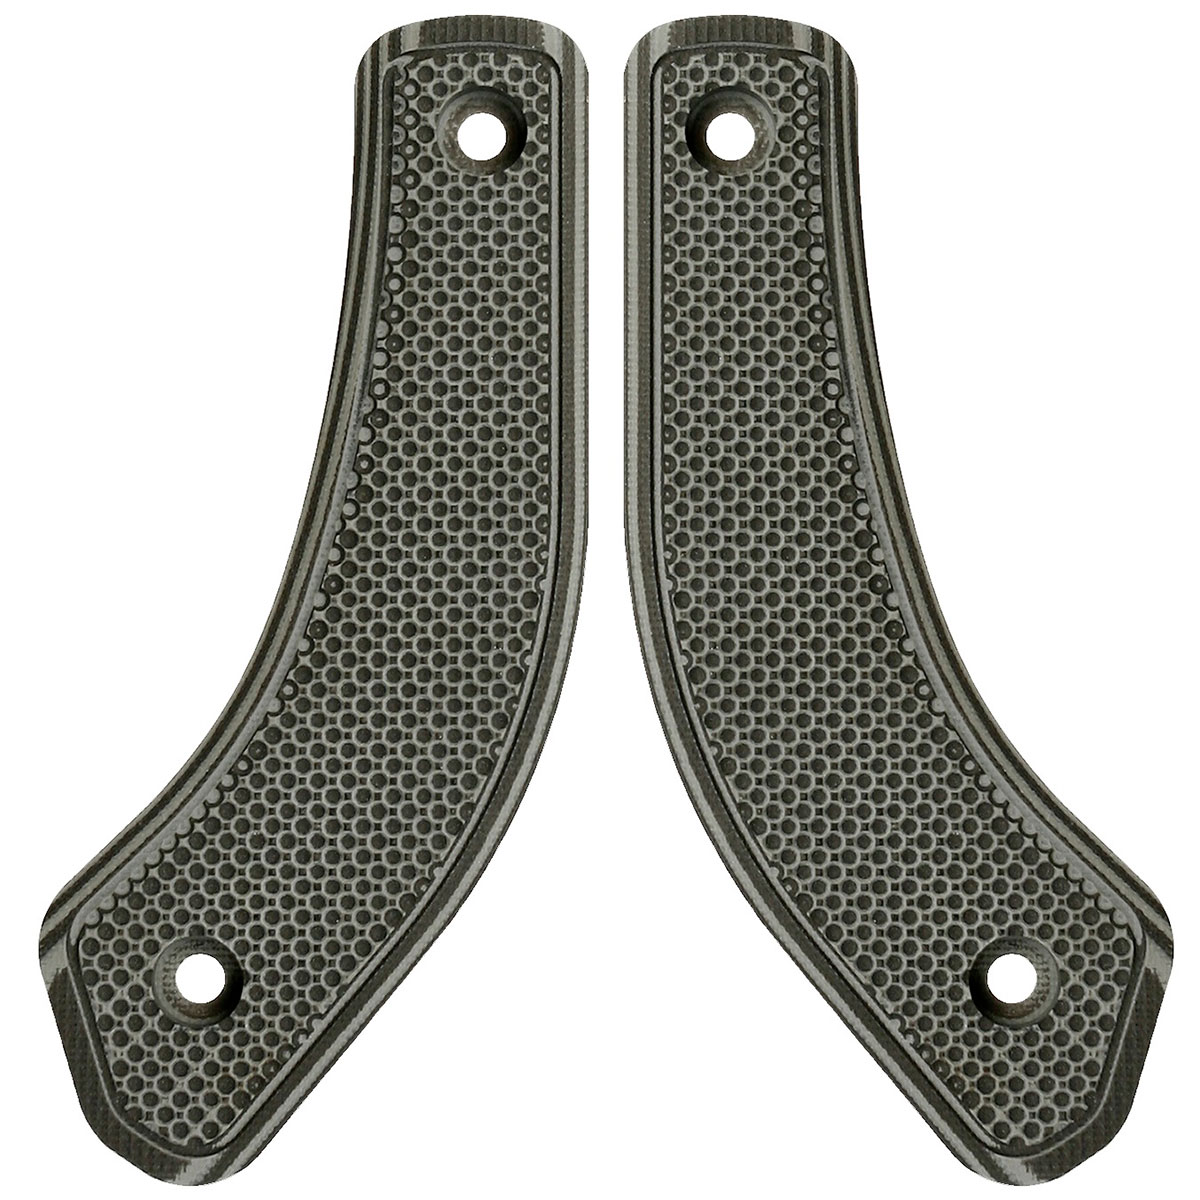 MIDWEST INDUSTRIES, INC. - LEVER STOCK G10 PISTOL GRIPS